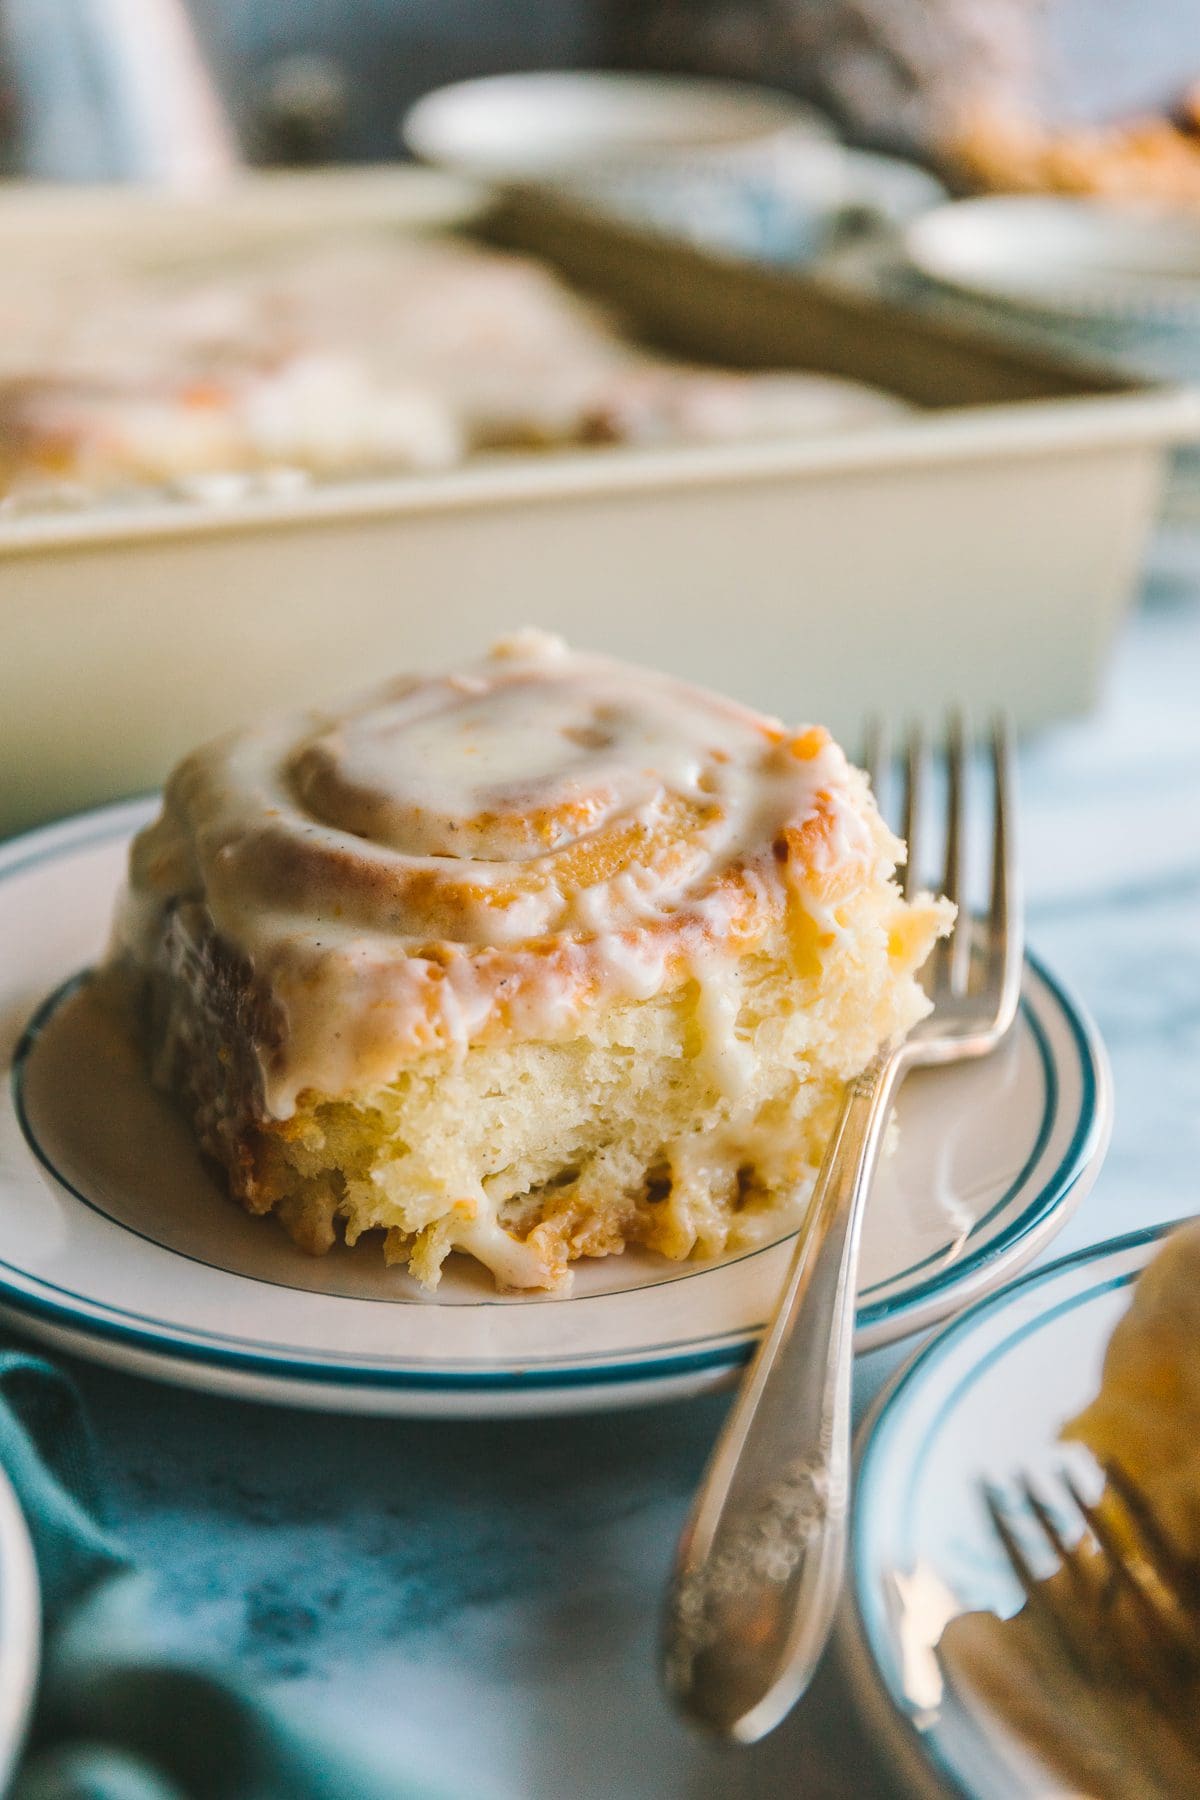 Sweet Rolls (Old Fashioned Yeast Rolls) l Beyond Frosting